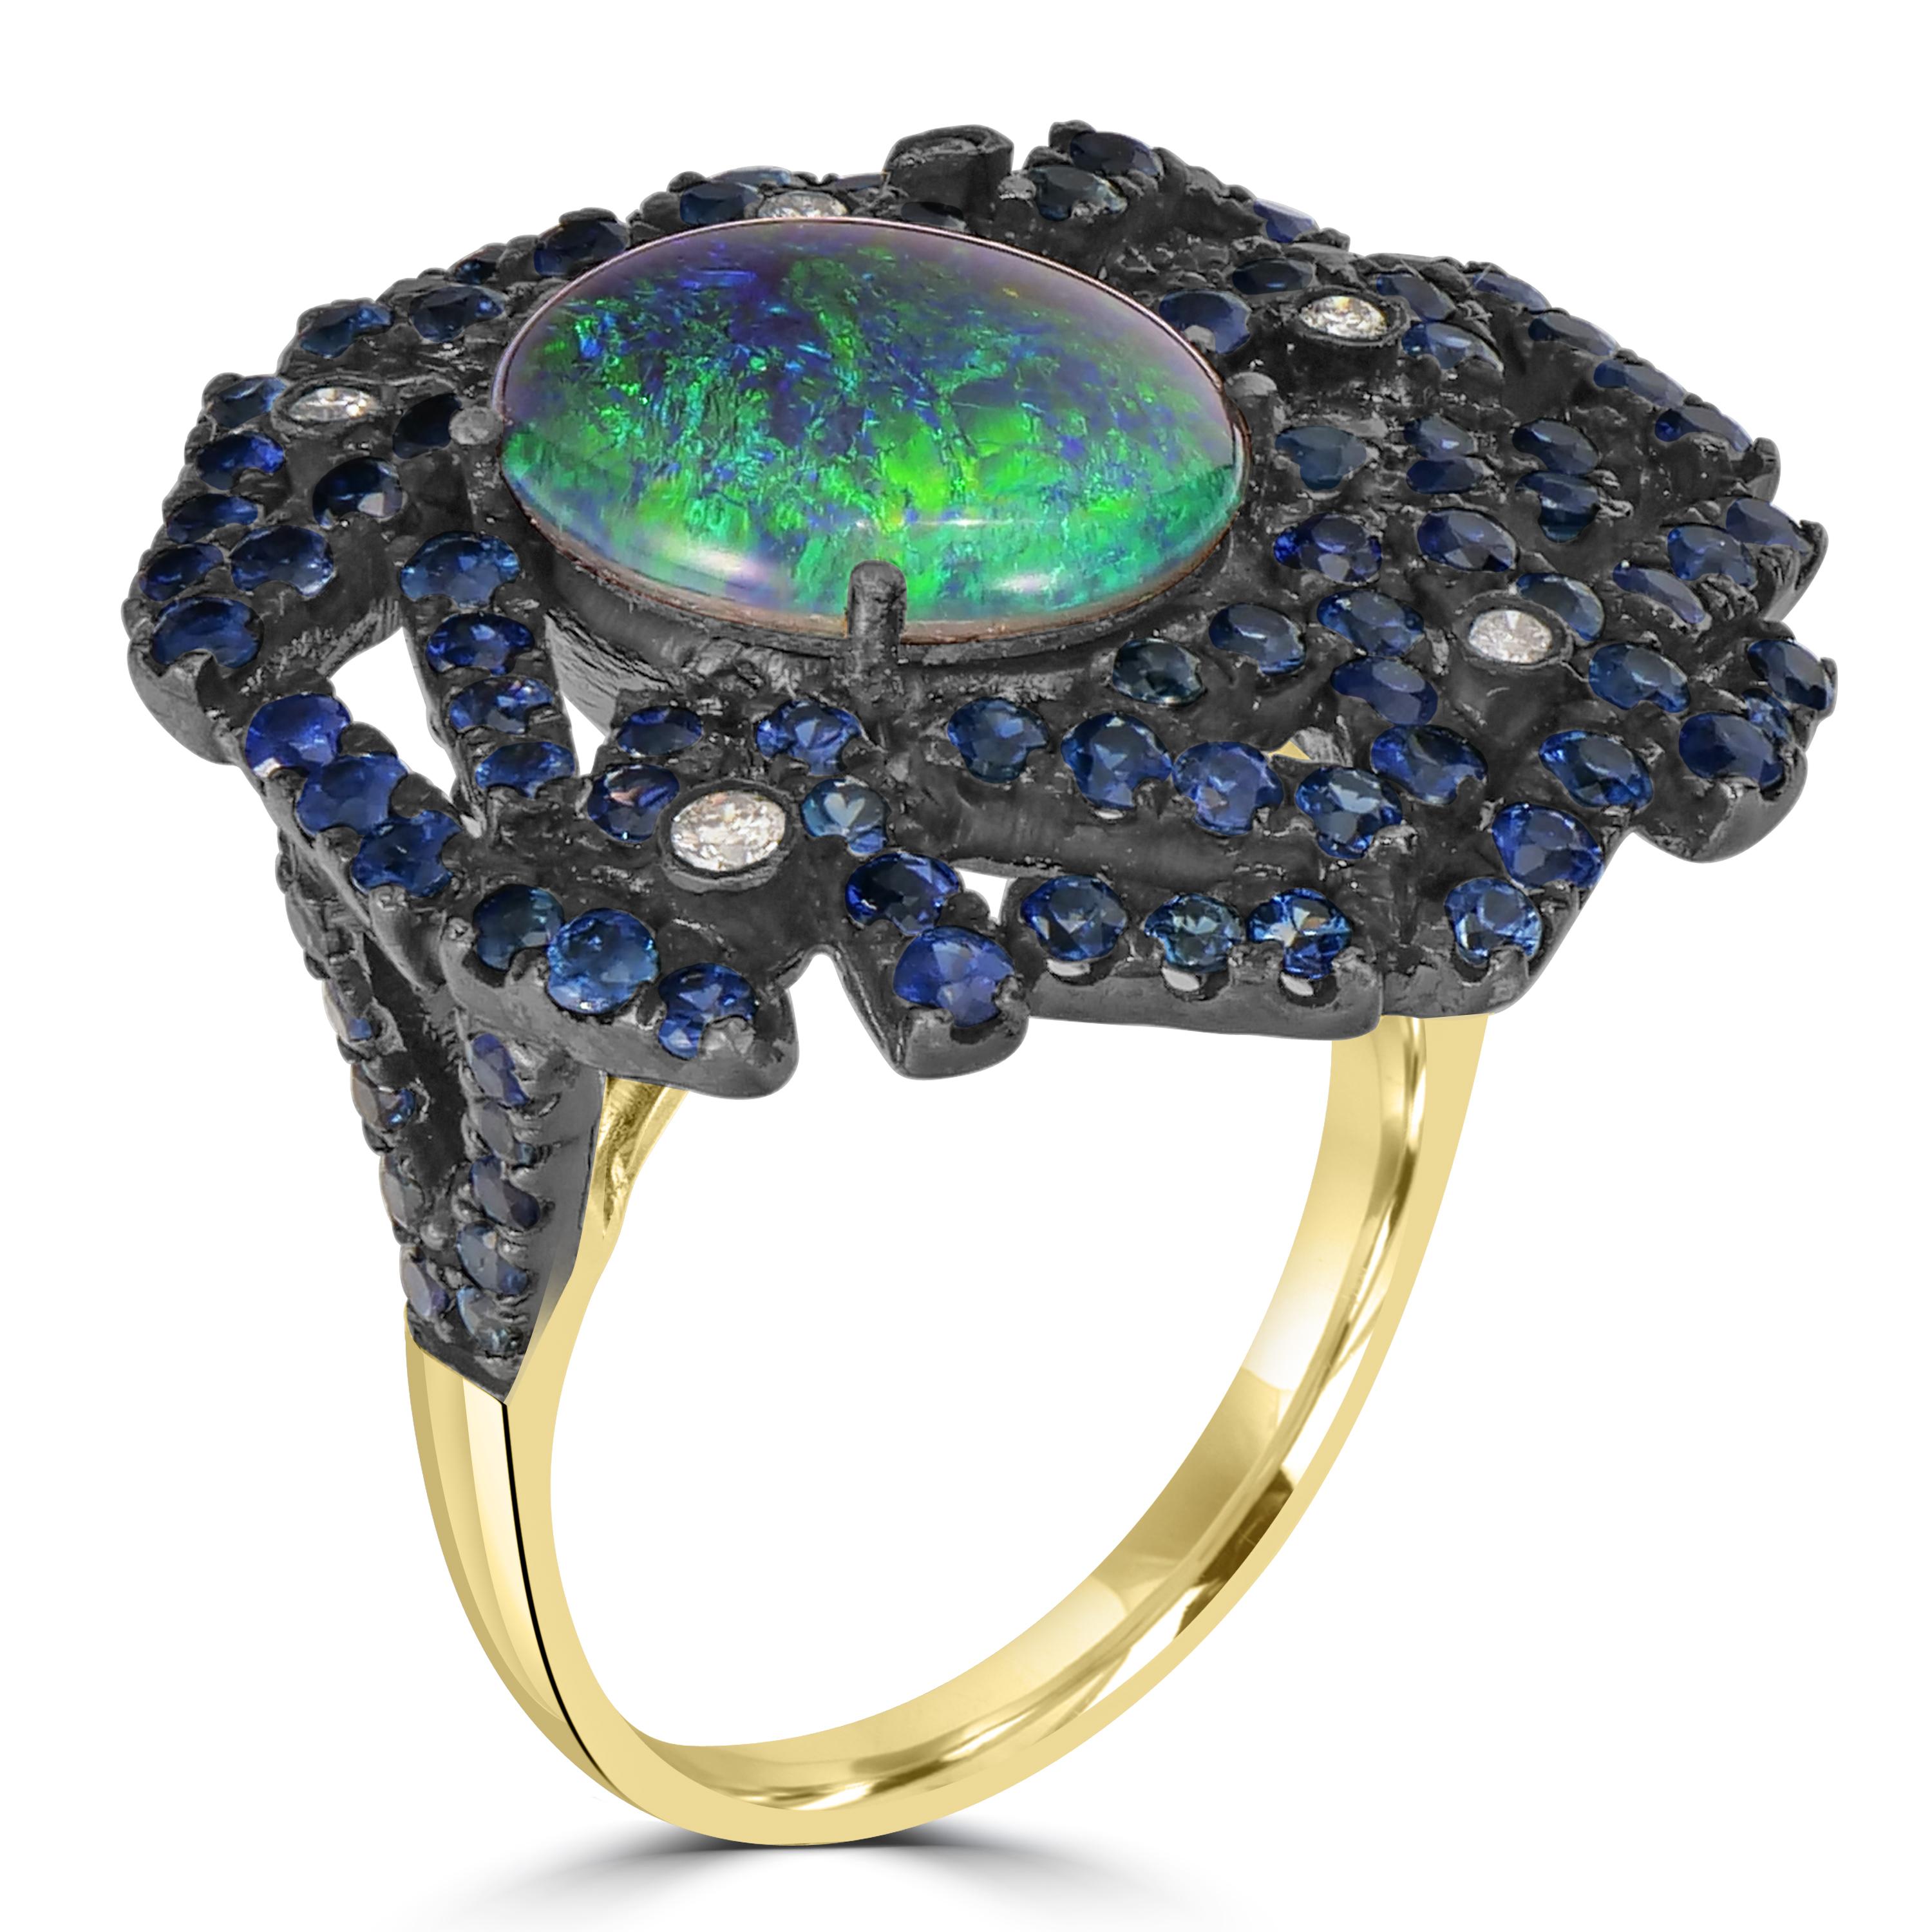 Introducing the Victorian 5.5 Cttw. Opal, Blue Sapphire, and Diamond Cluster Split Shank Ring—a harmonious symphony of colors and design, poised to grace your hand with timeless elegance.

At the heart of this captivating ring sits an oval sky blue